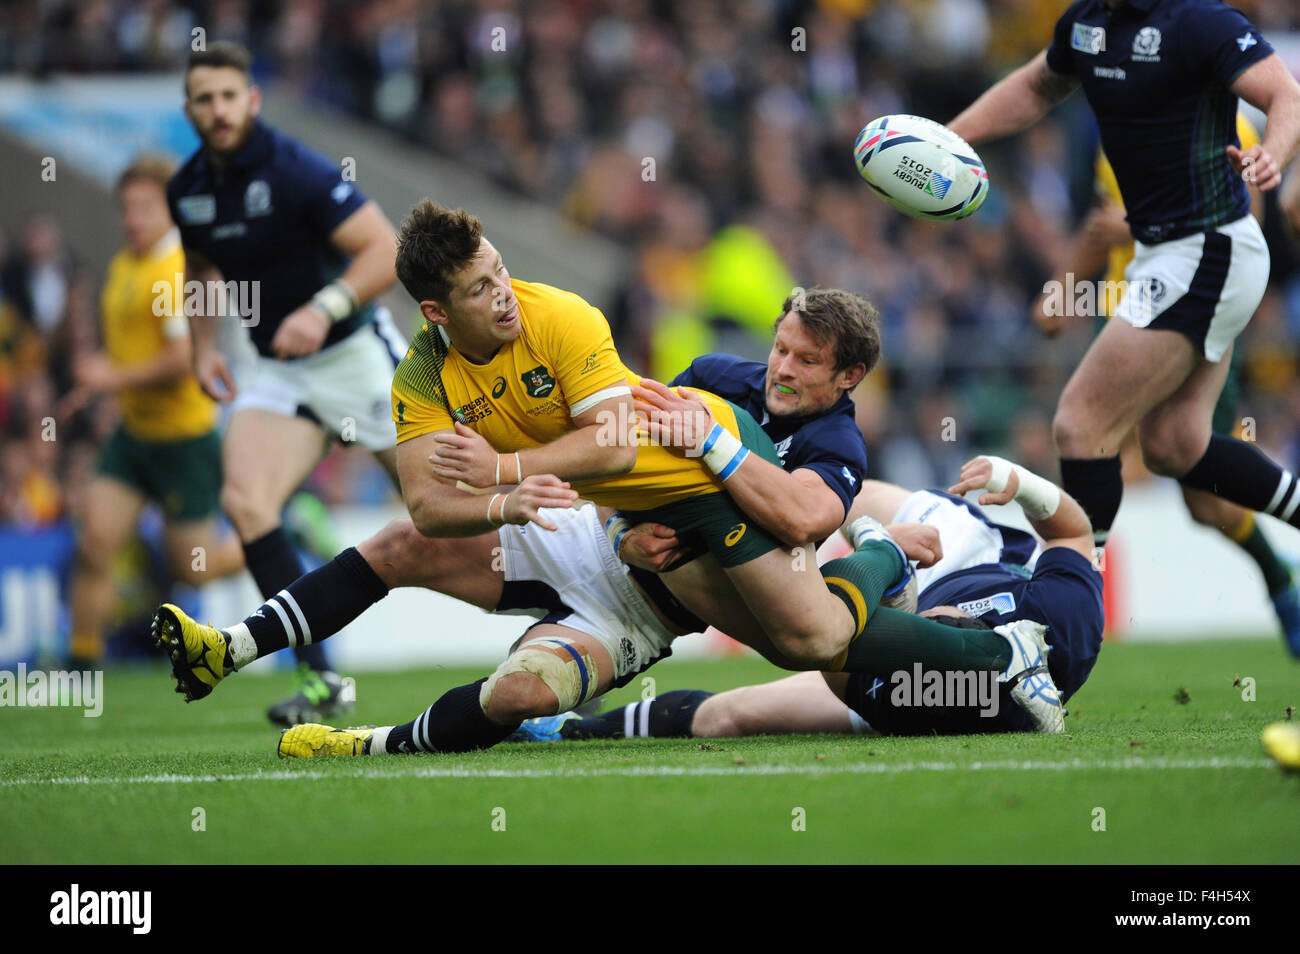 18 October 2015: Bernard Foley of Australia offloads as he is tackled just short of the line by Peter Horne of Scotland during the Quarter Final of the Rugby World Cup 2015 between Australia and Scotland - Twickenham Stadium, London.(Photo by: Rob Munro/Stewart Communications/CSM) Stock Photo